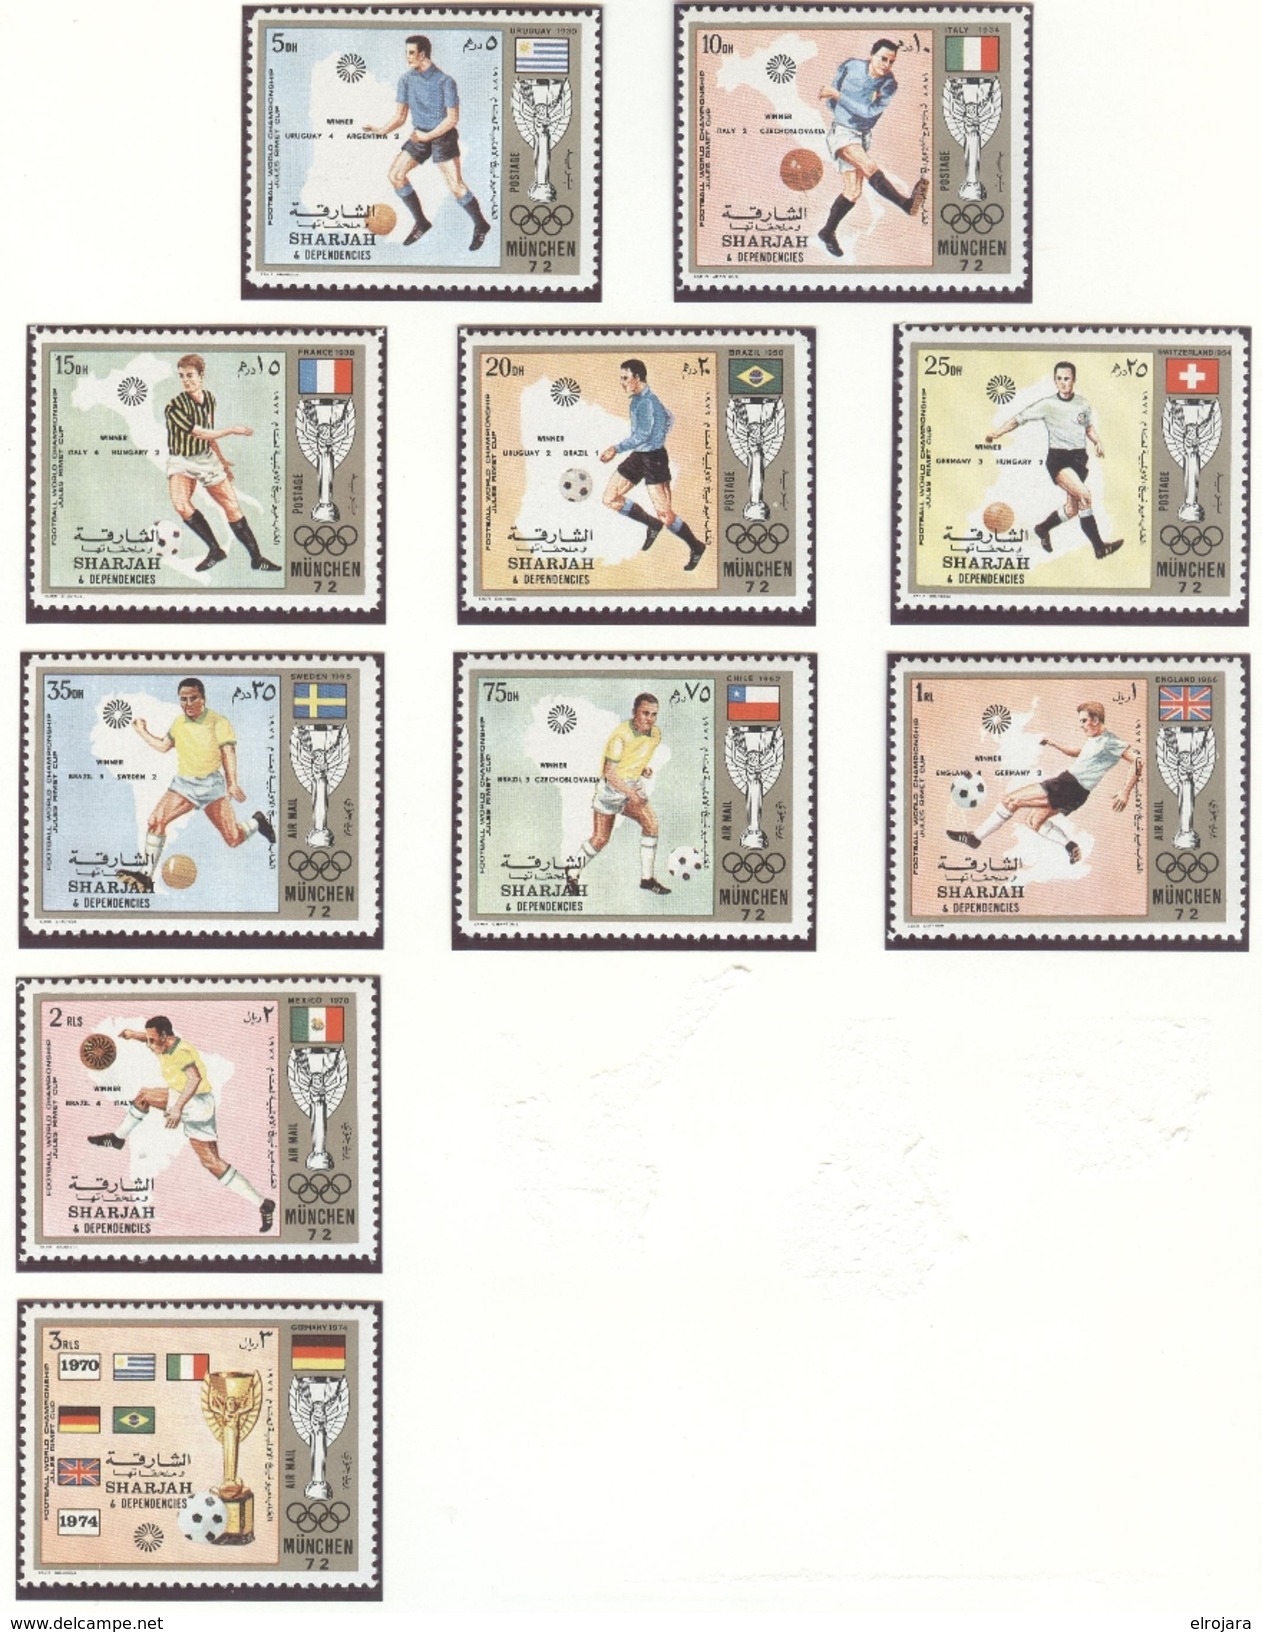 SHARJAH Perforated Set Mint Without Hinge - 1974 – Germania Ovest